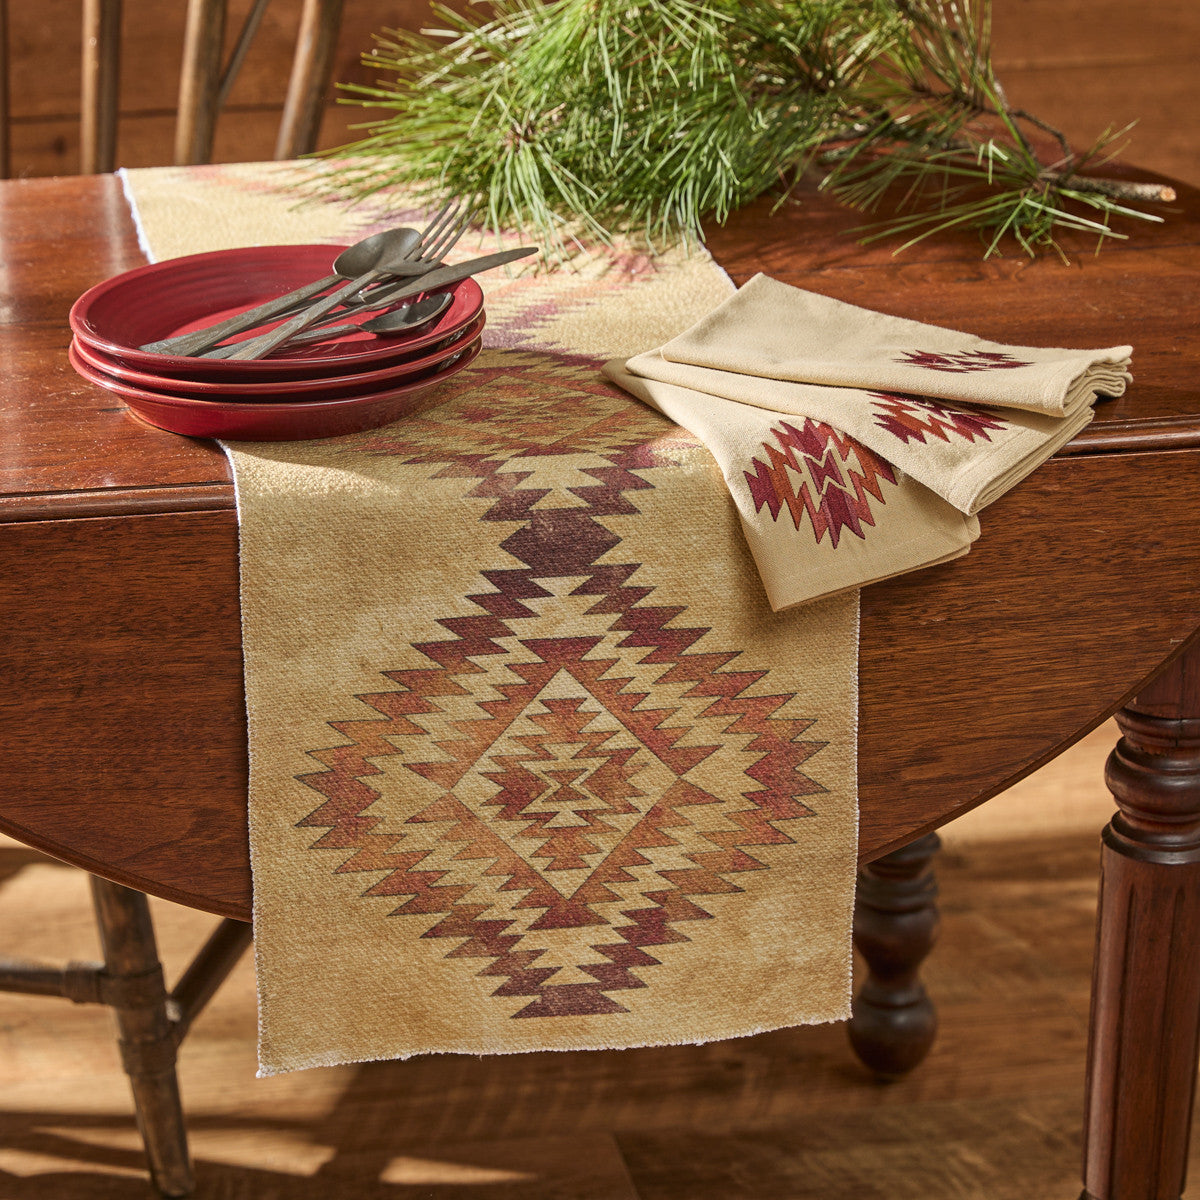 Fire In The Mountains Table Runner 54" L Set of 2 - Park Designs